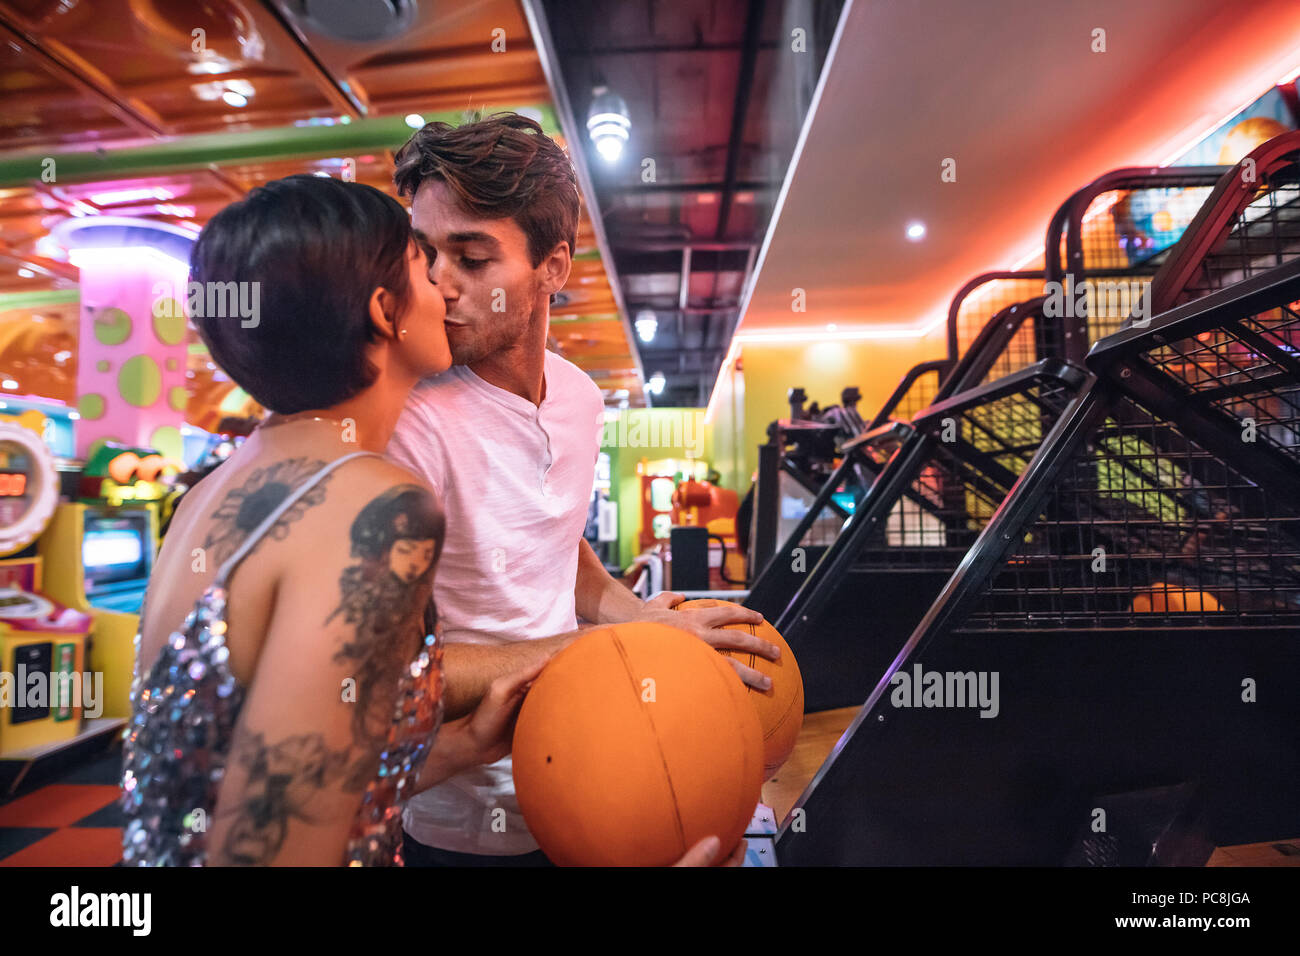 Couple kissing each other standing in a gaming parlour holding basketballs. Man and woman in romantic mood at a gaming arcade having fun playing games Stock Photo